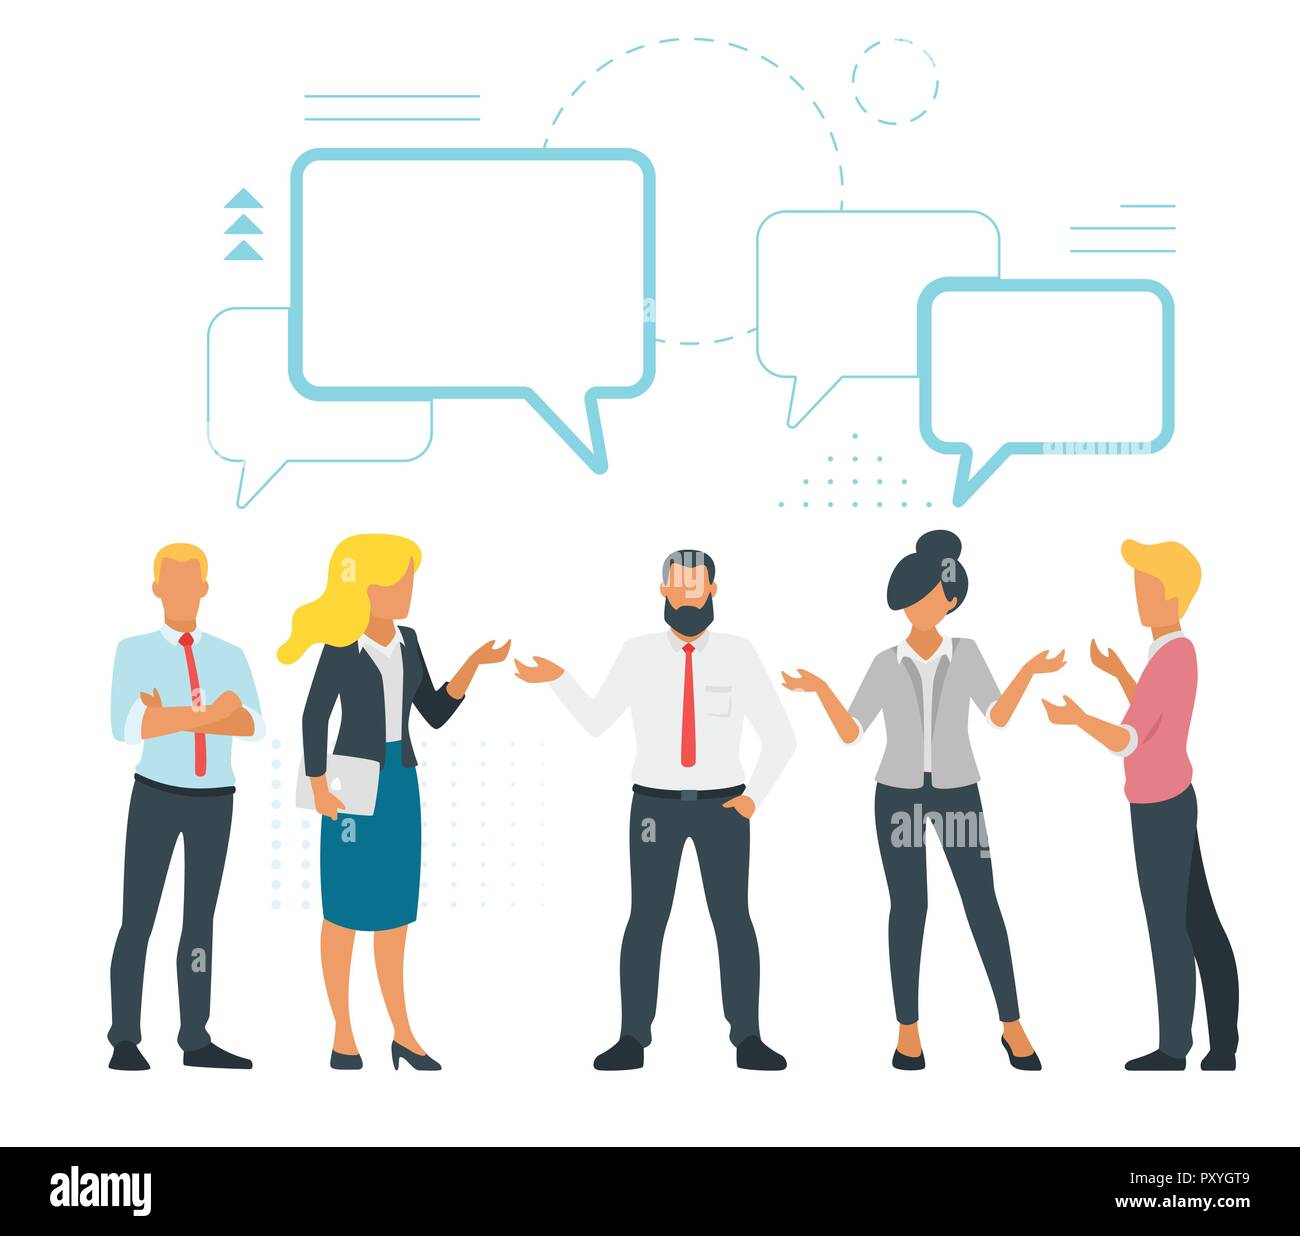 Vector flat style illustration of business people chat and discussing data. Social networking concept. Minimalism design with people silhouettes and s Stock Vector